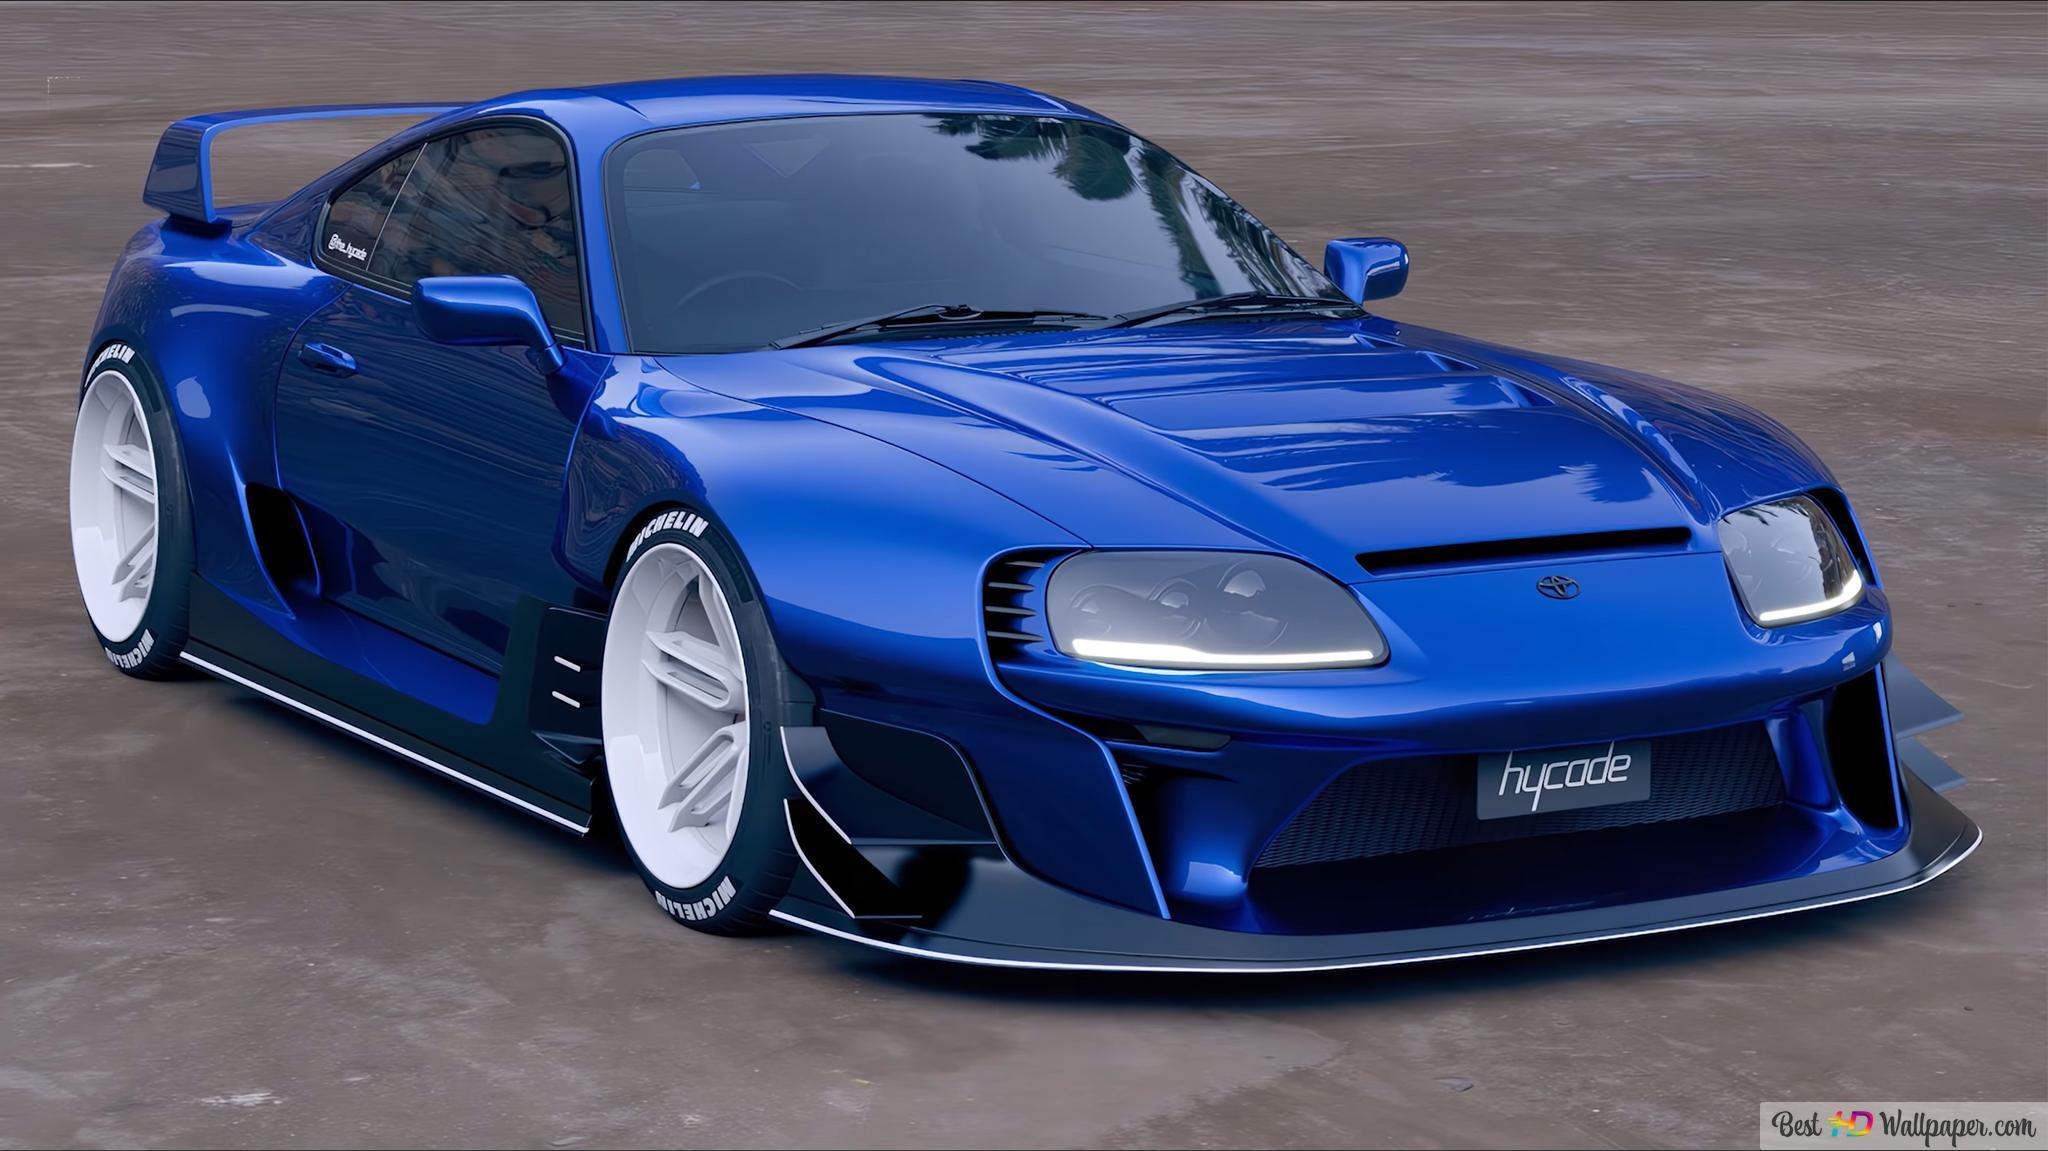 Blue toyota supra mk4 with bady kit applied 4K wallpaper download